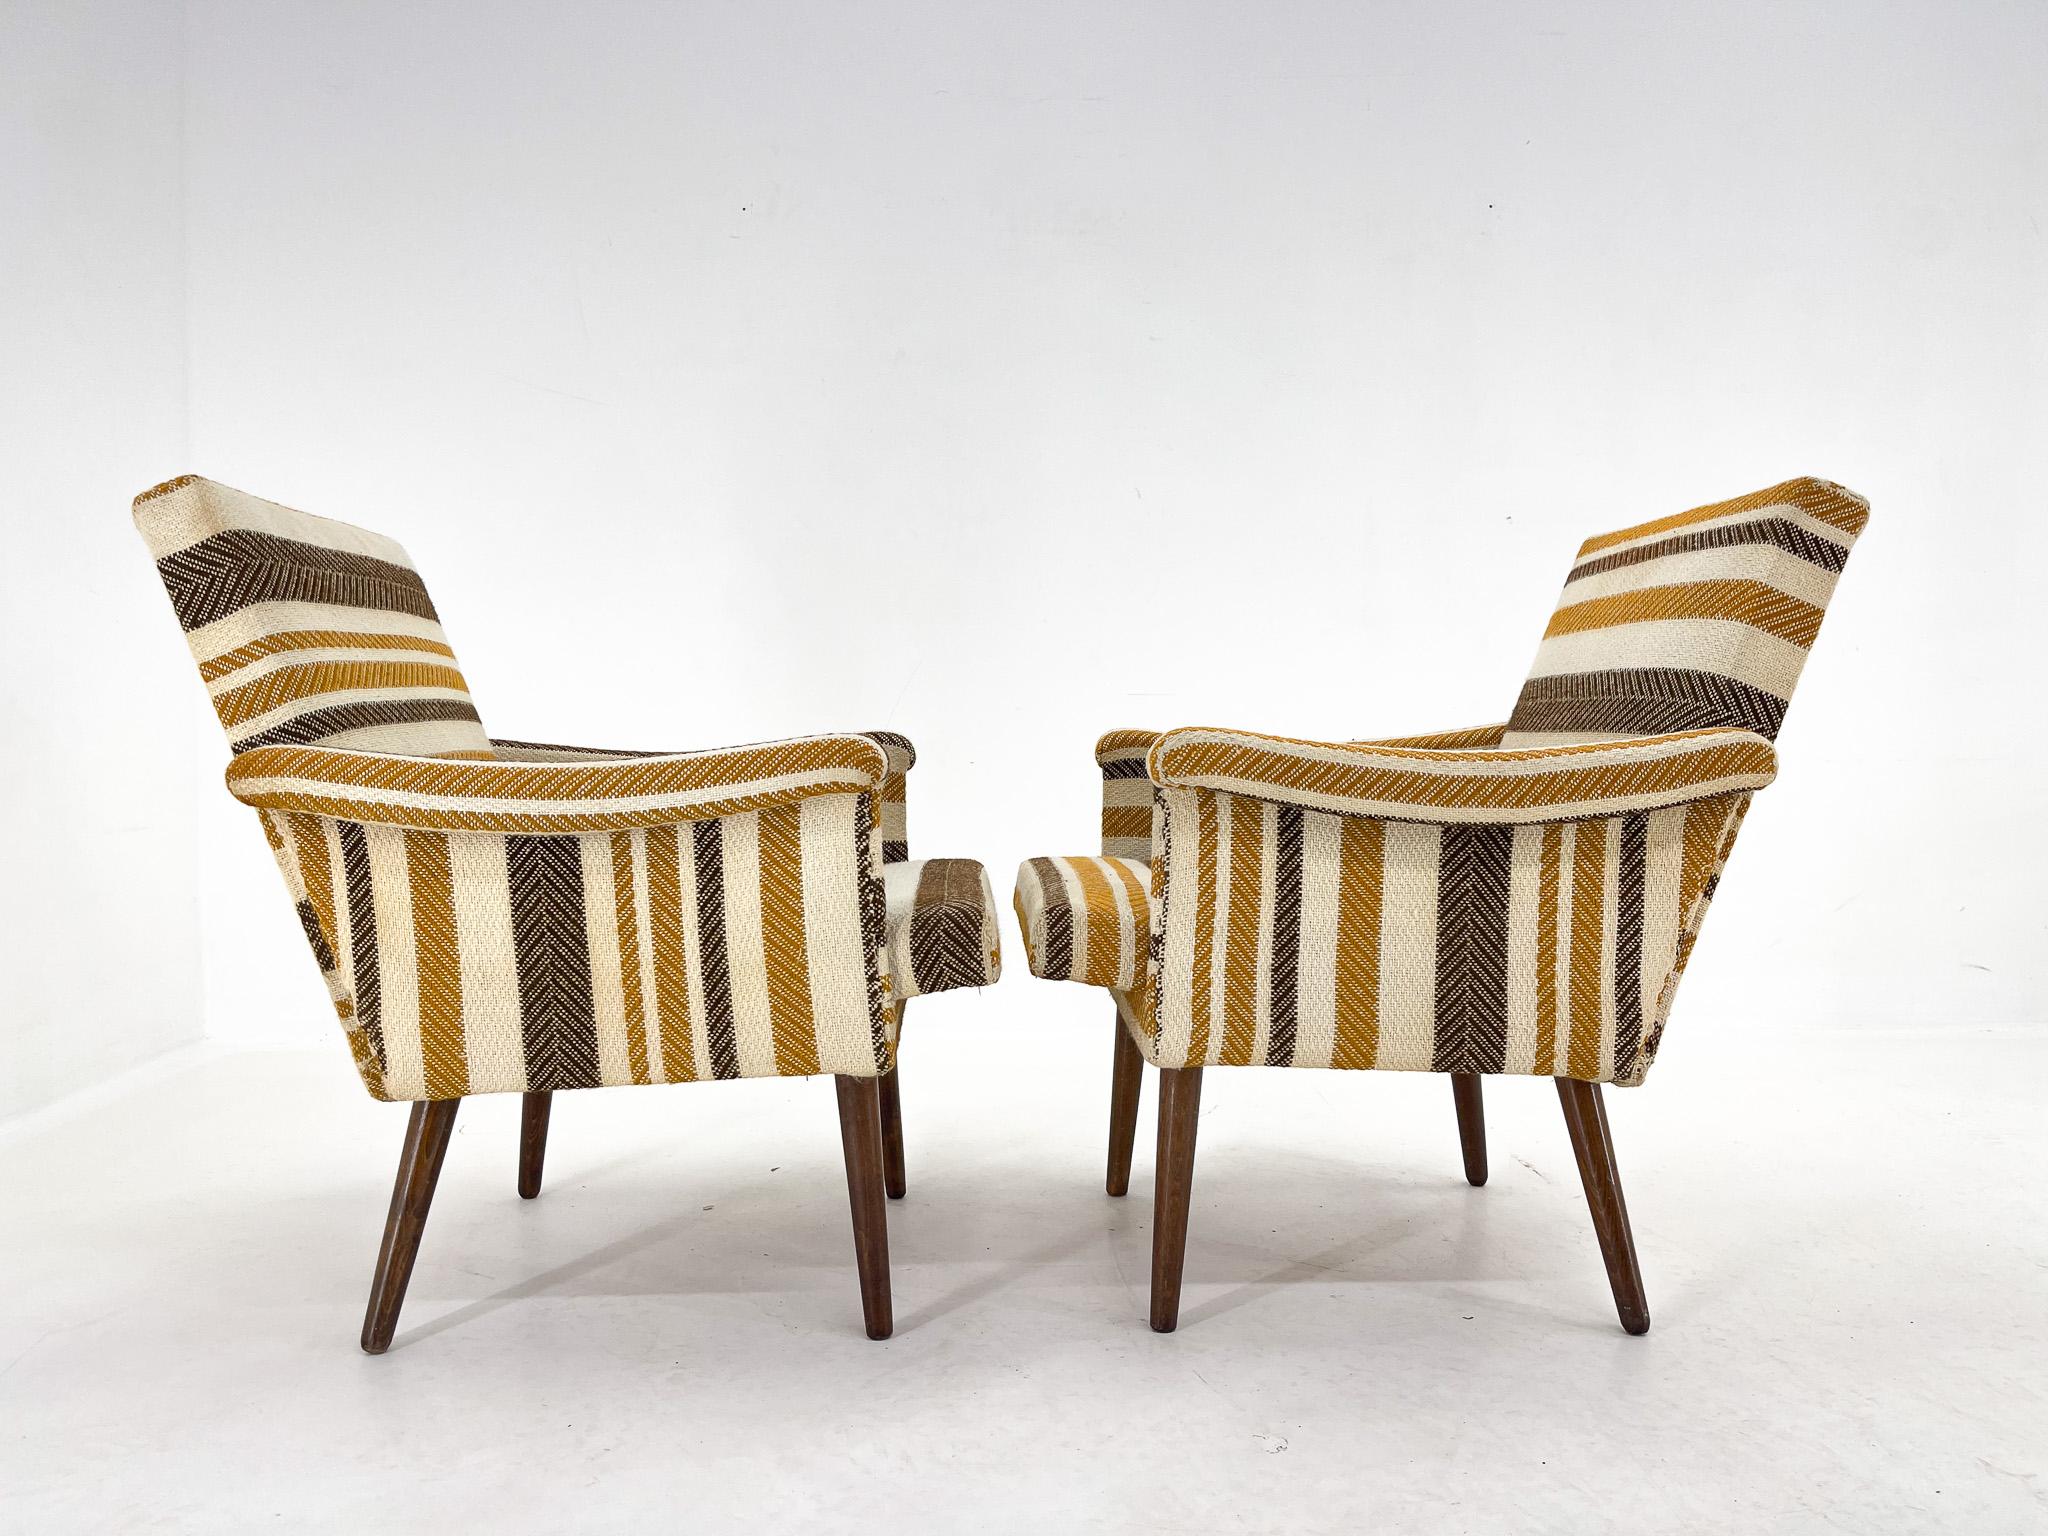 Pair of fabric and wood vintage armchairs with original upholstery. Suitable for reupholstering.